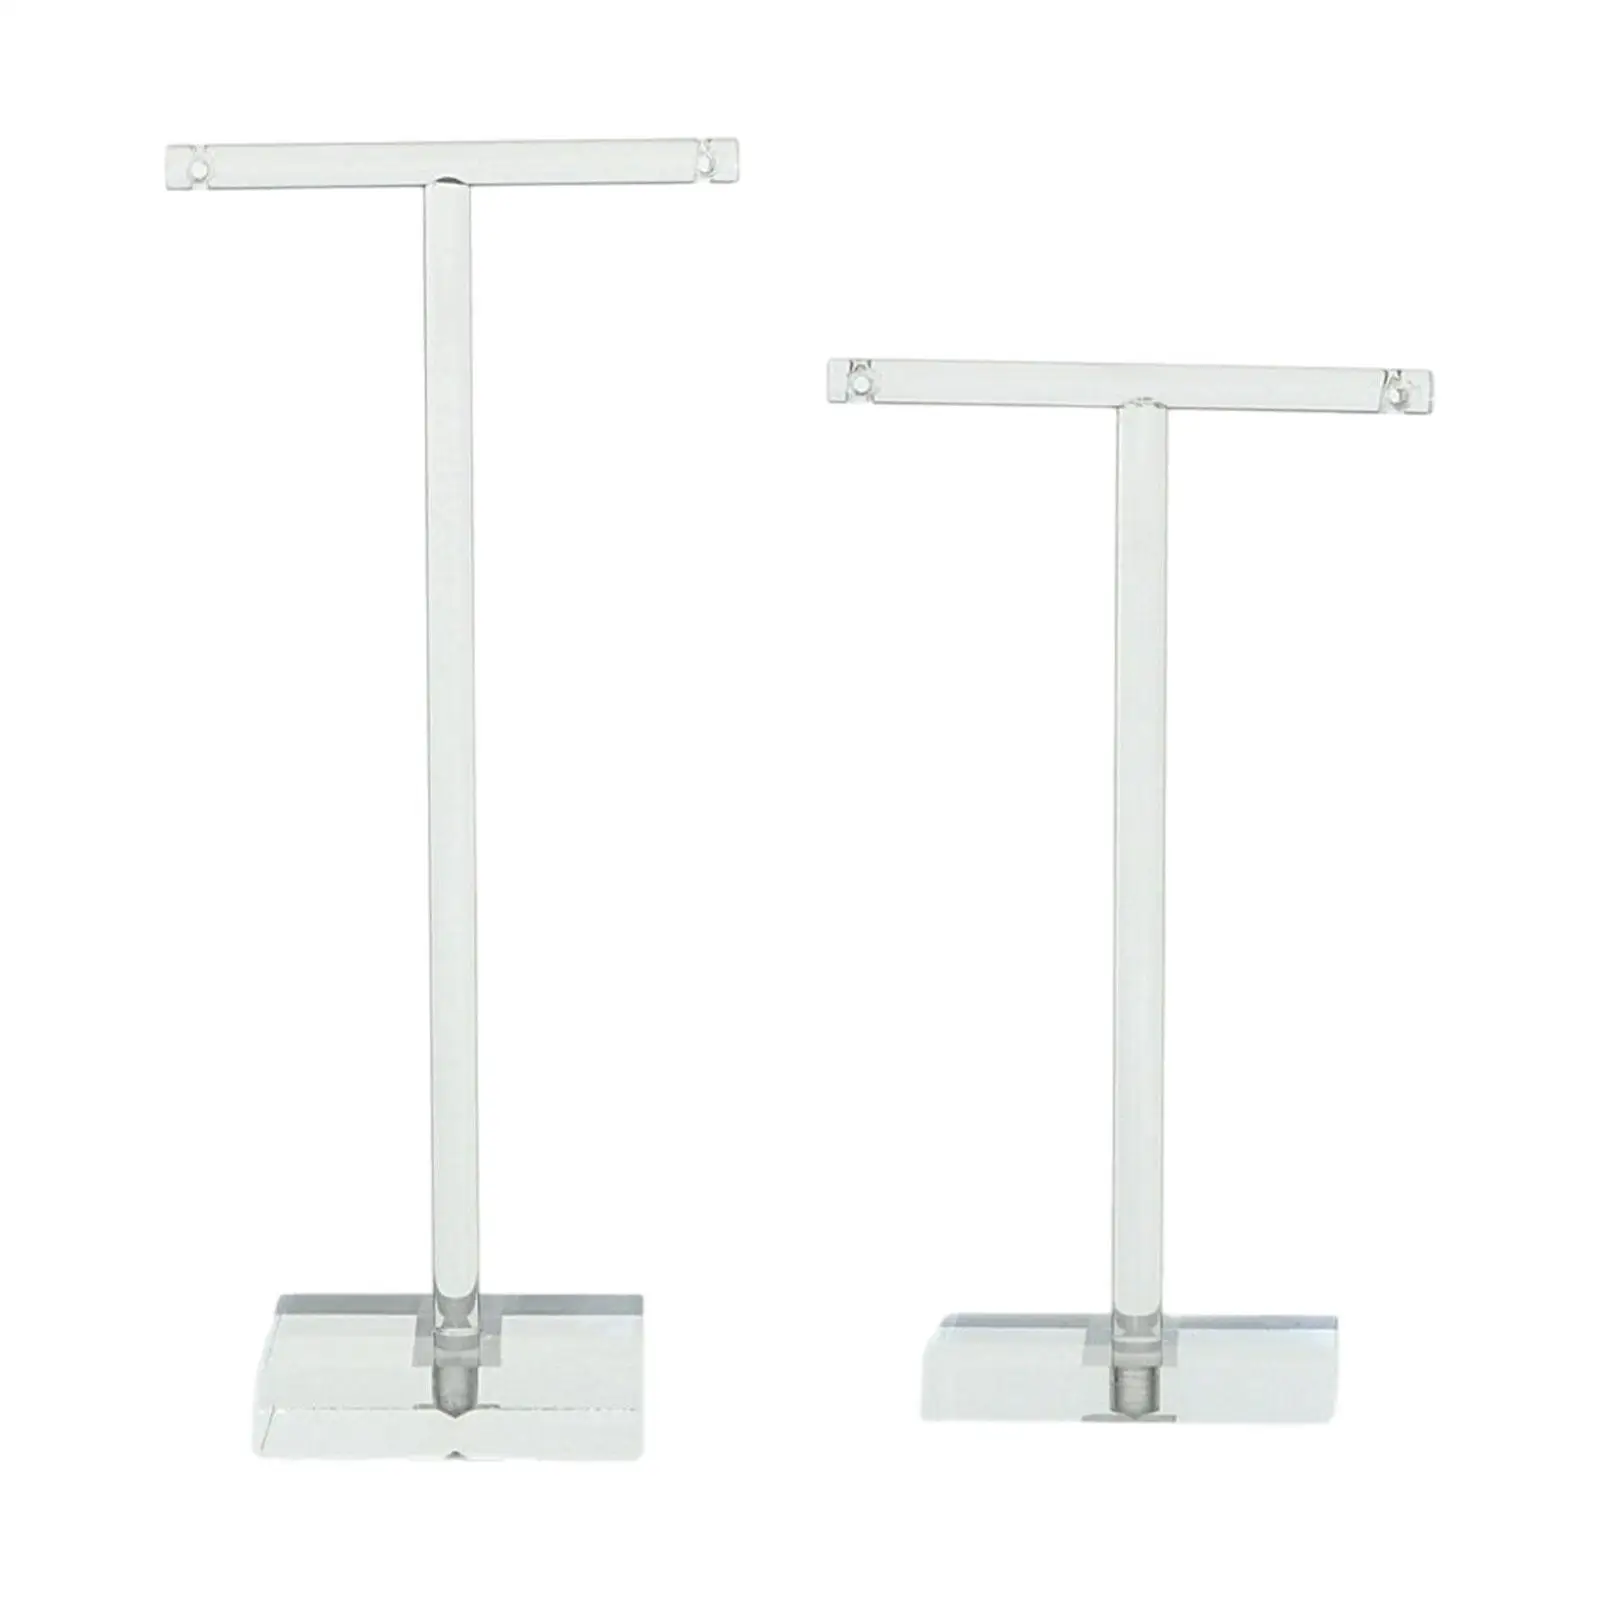 2x Earring Display Stand, Jewelry Stand T Bar for Women Girls, Jewelry Organizer Ear Studs Holder for Store, Dresser Home